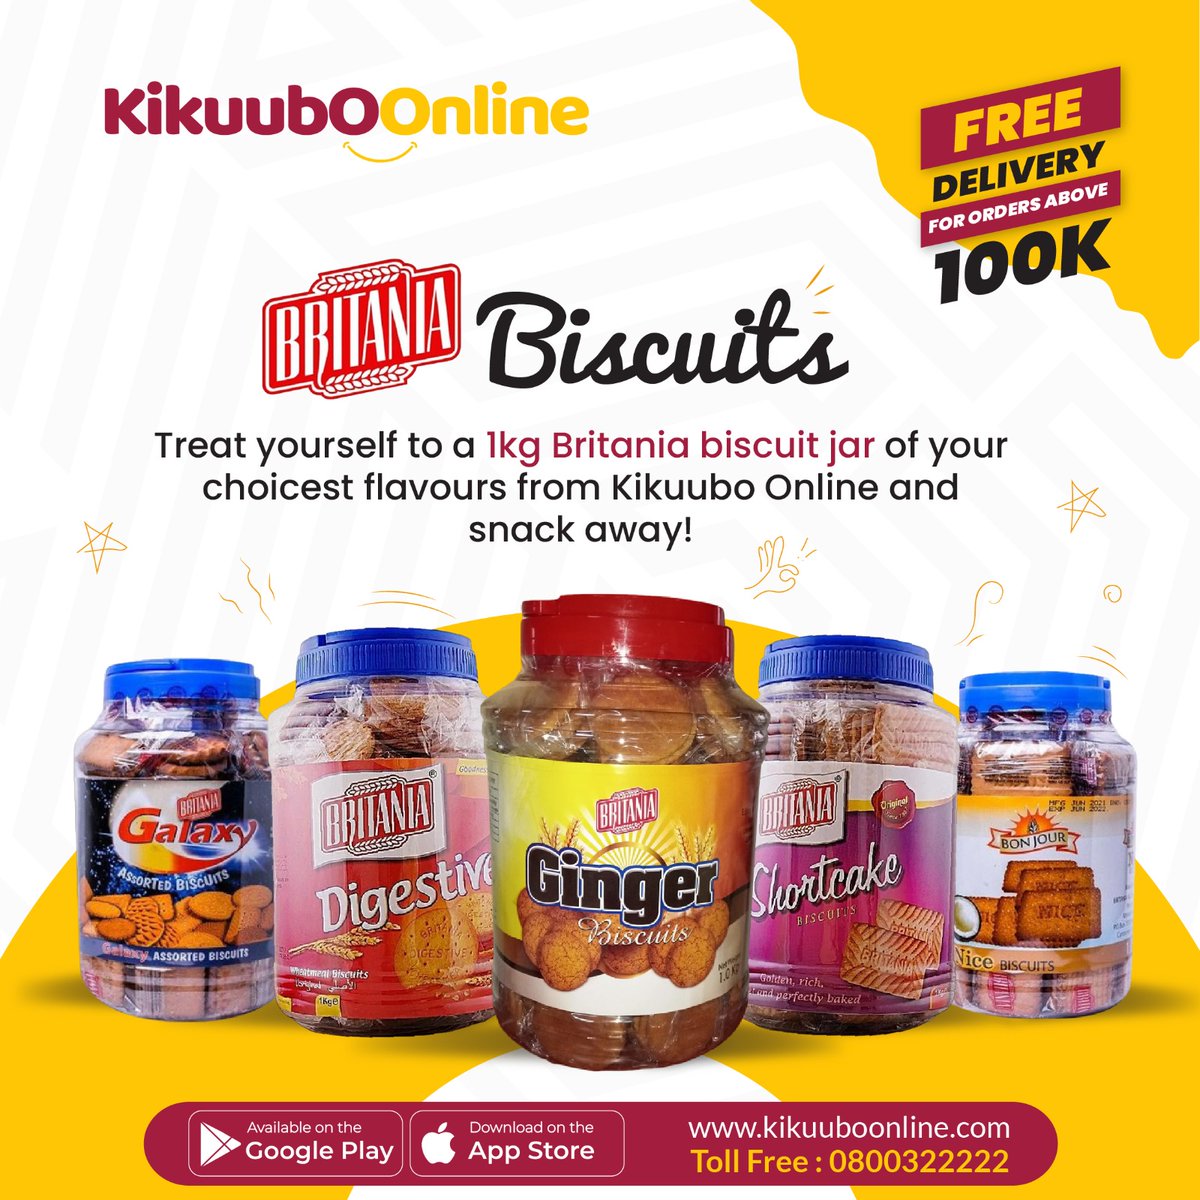 Treat yourself to a 1kg Britania biscuit jar of your choicest flavours from Kikuubo Online and snack away! Download the Kikuubo Online App or visit our website kikuuboonline.com to start shopping. Free delivery for orders above 100k! #discounts #freedelivery